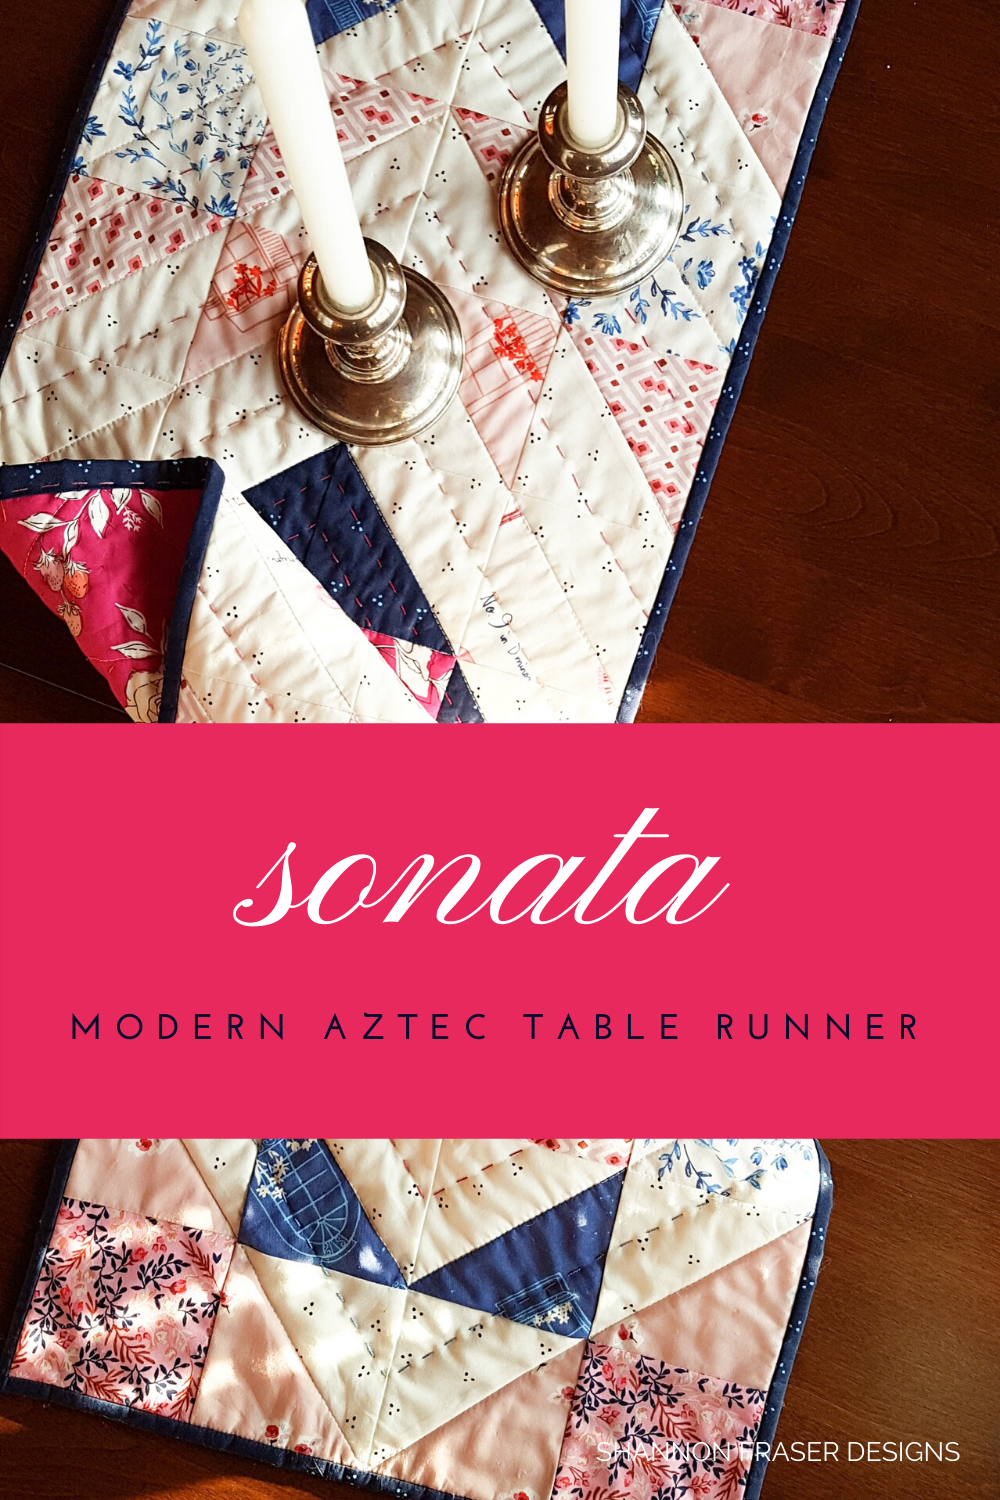 Modern Aztec table runner on a mahogany dining room table with silver candle sticks and white candels | 2019 in Review + 2020 Goals | Shannon Fraser Designs